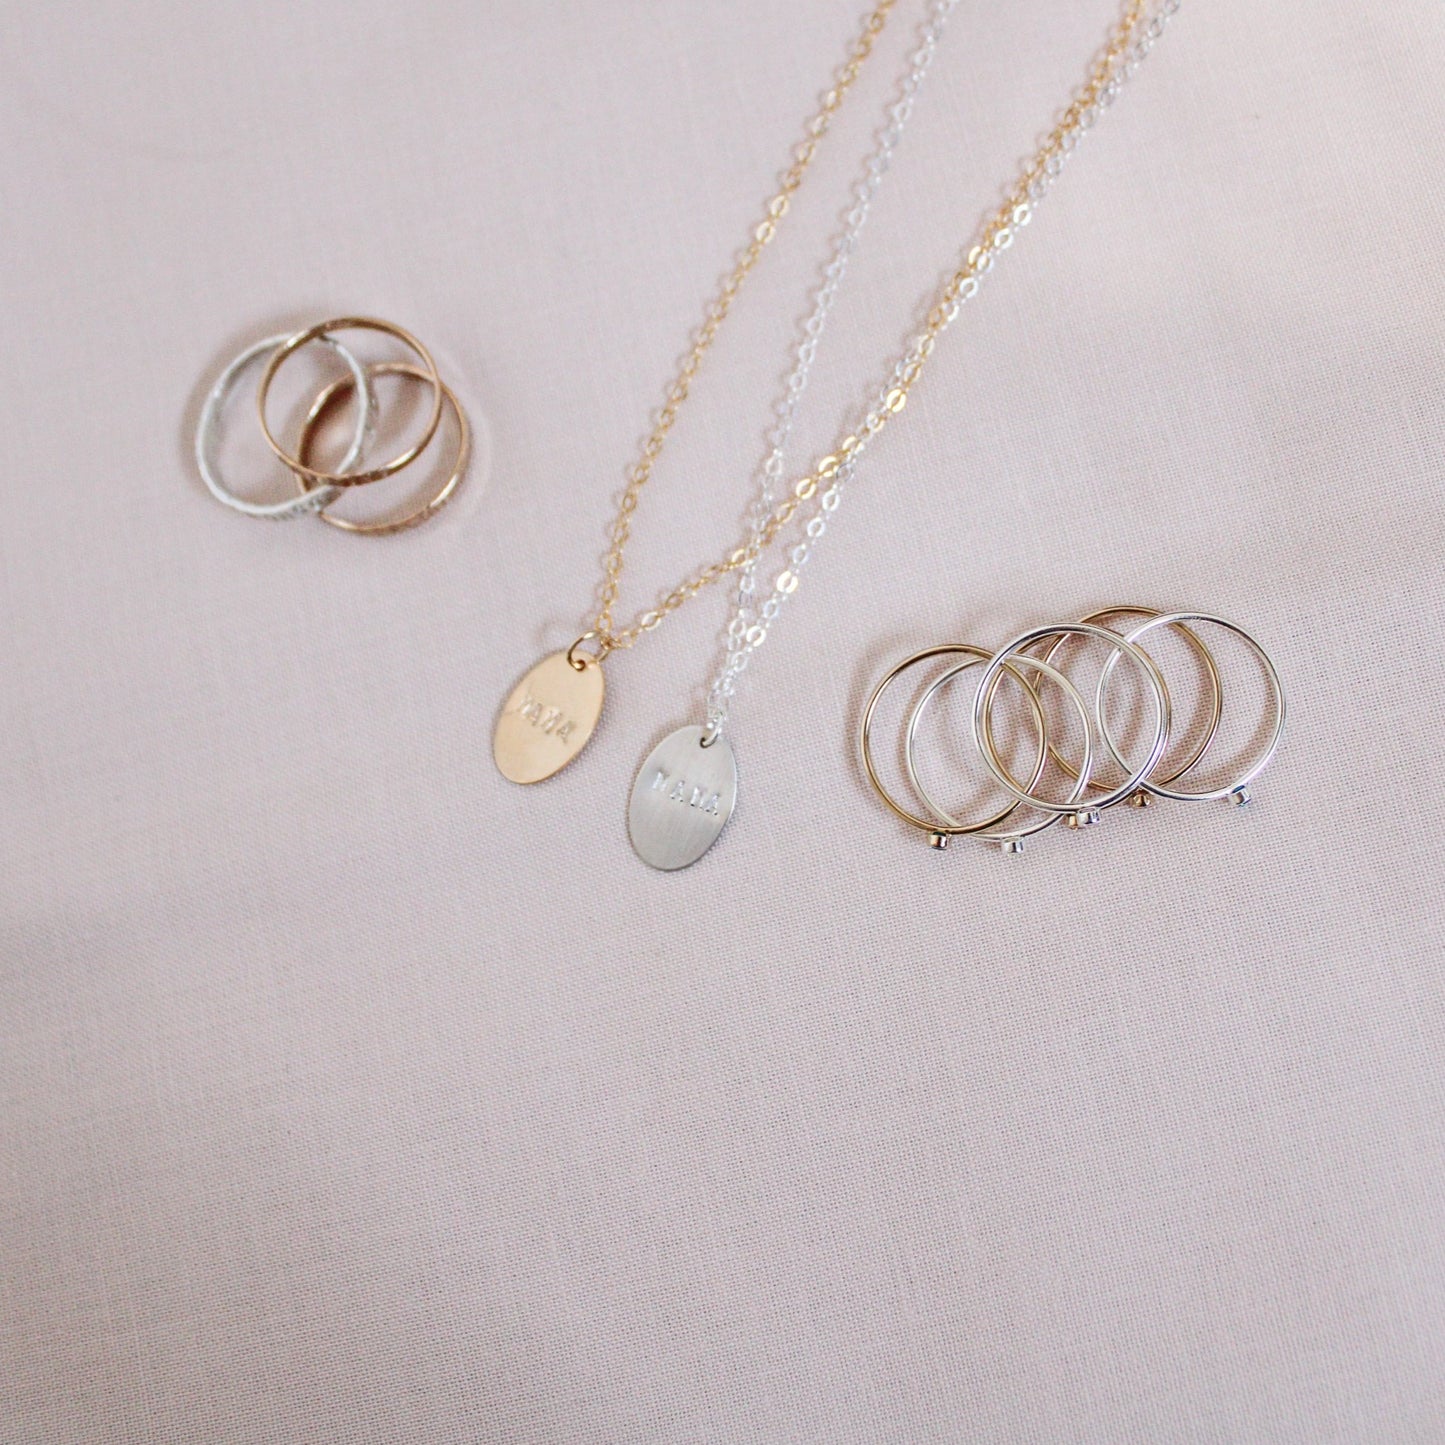 New Mama In Town Bundle - 14k Gold Filled